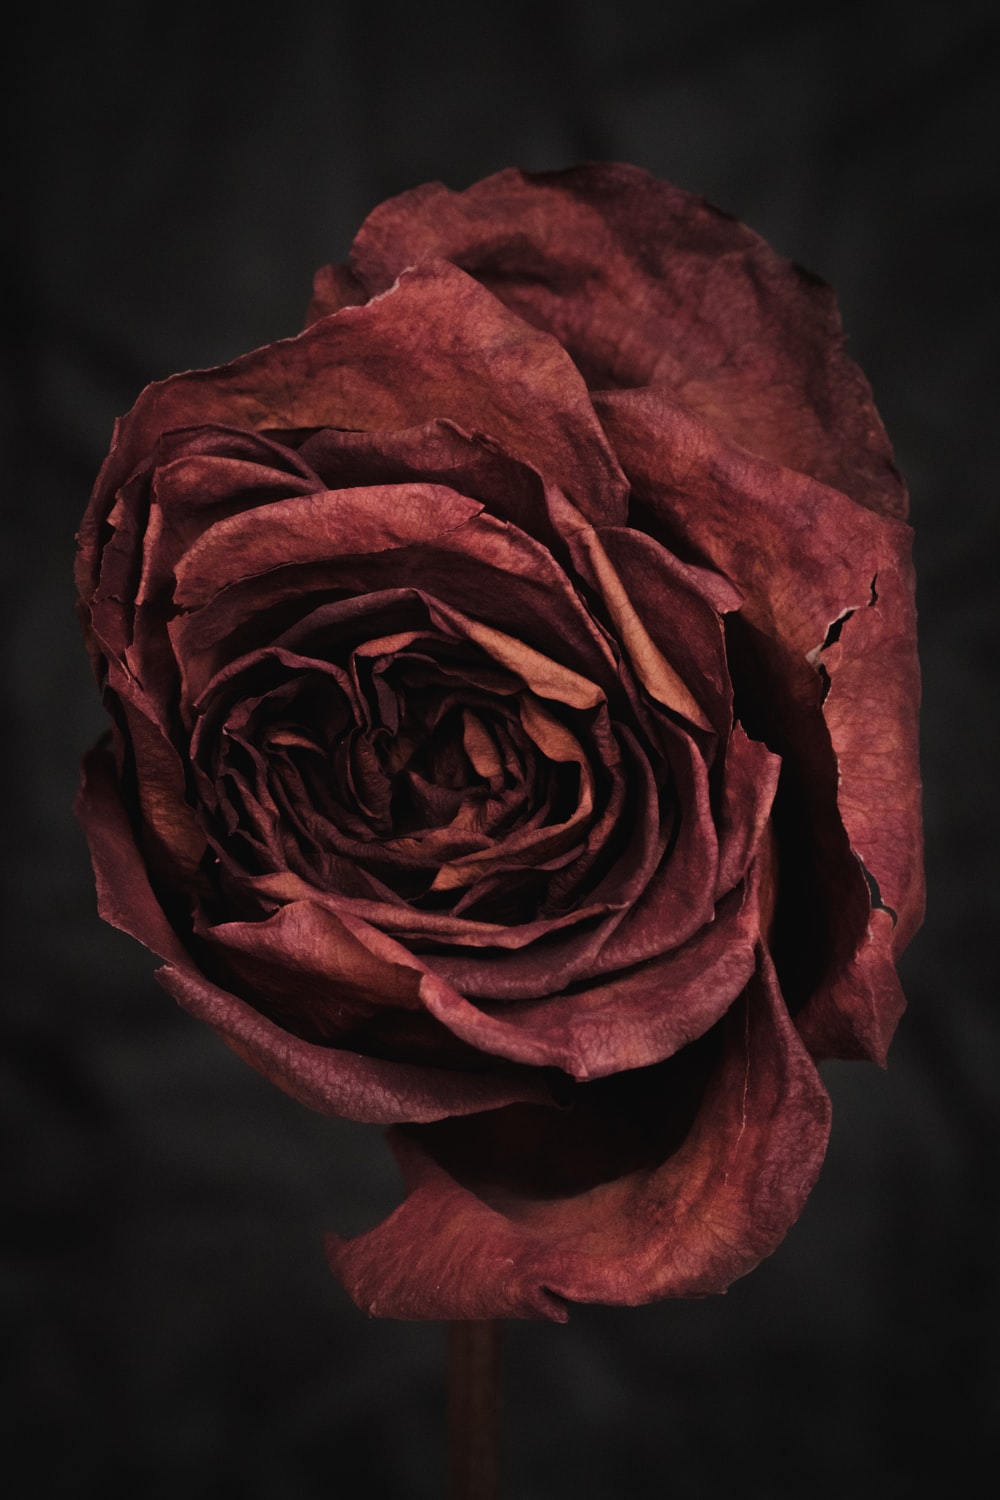 Dying Rose Picture. Download Free Image